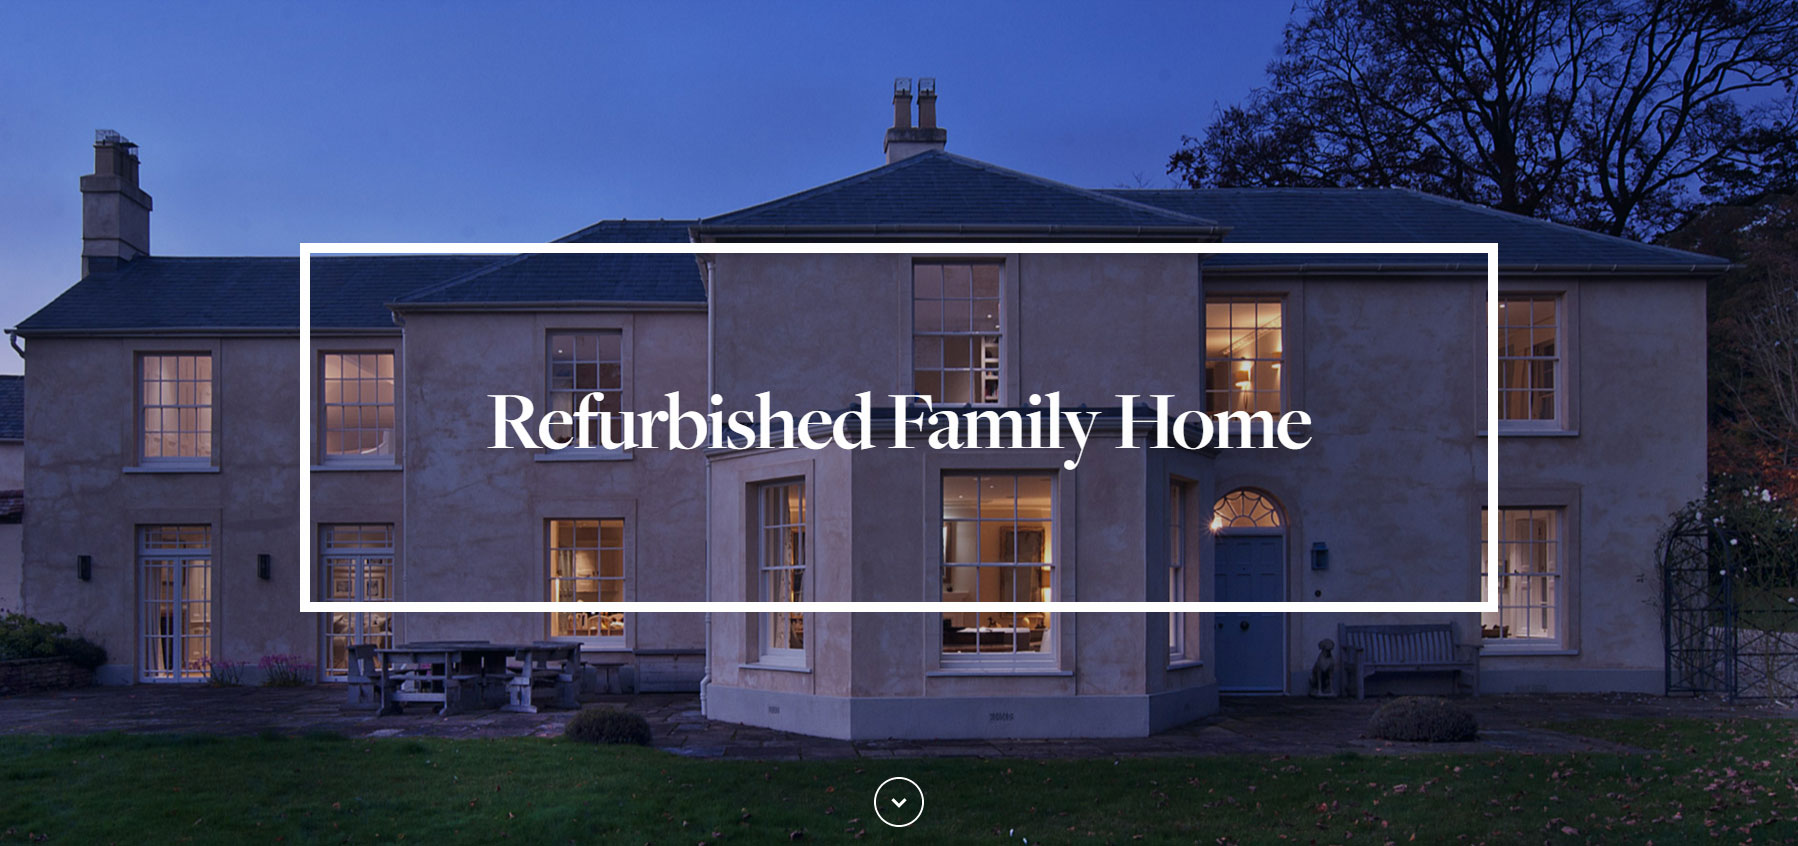 RJ Smith - Website of the Day